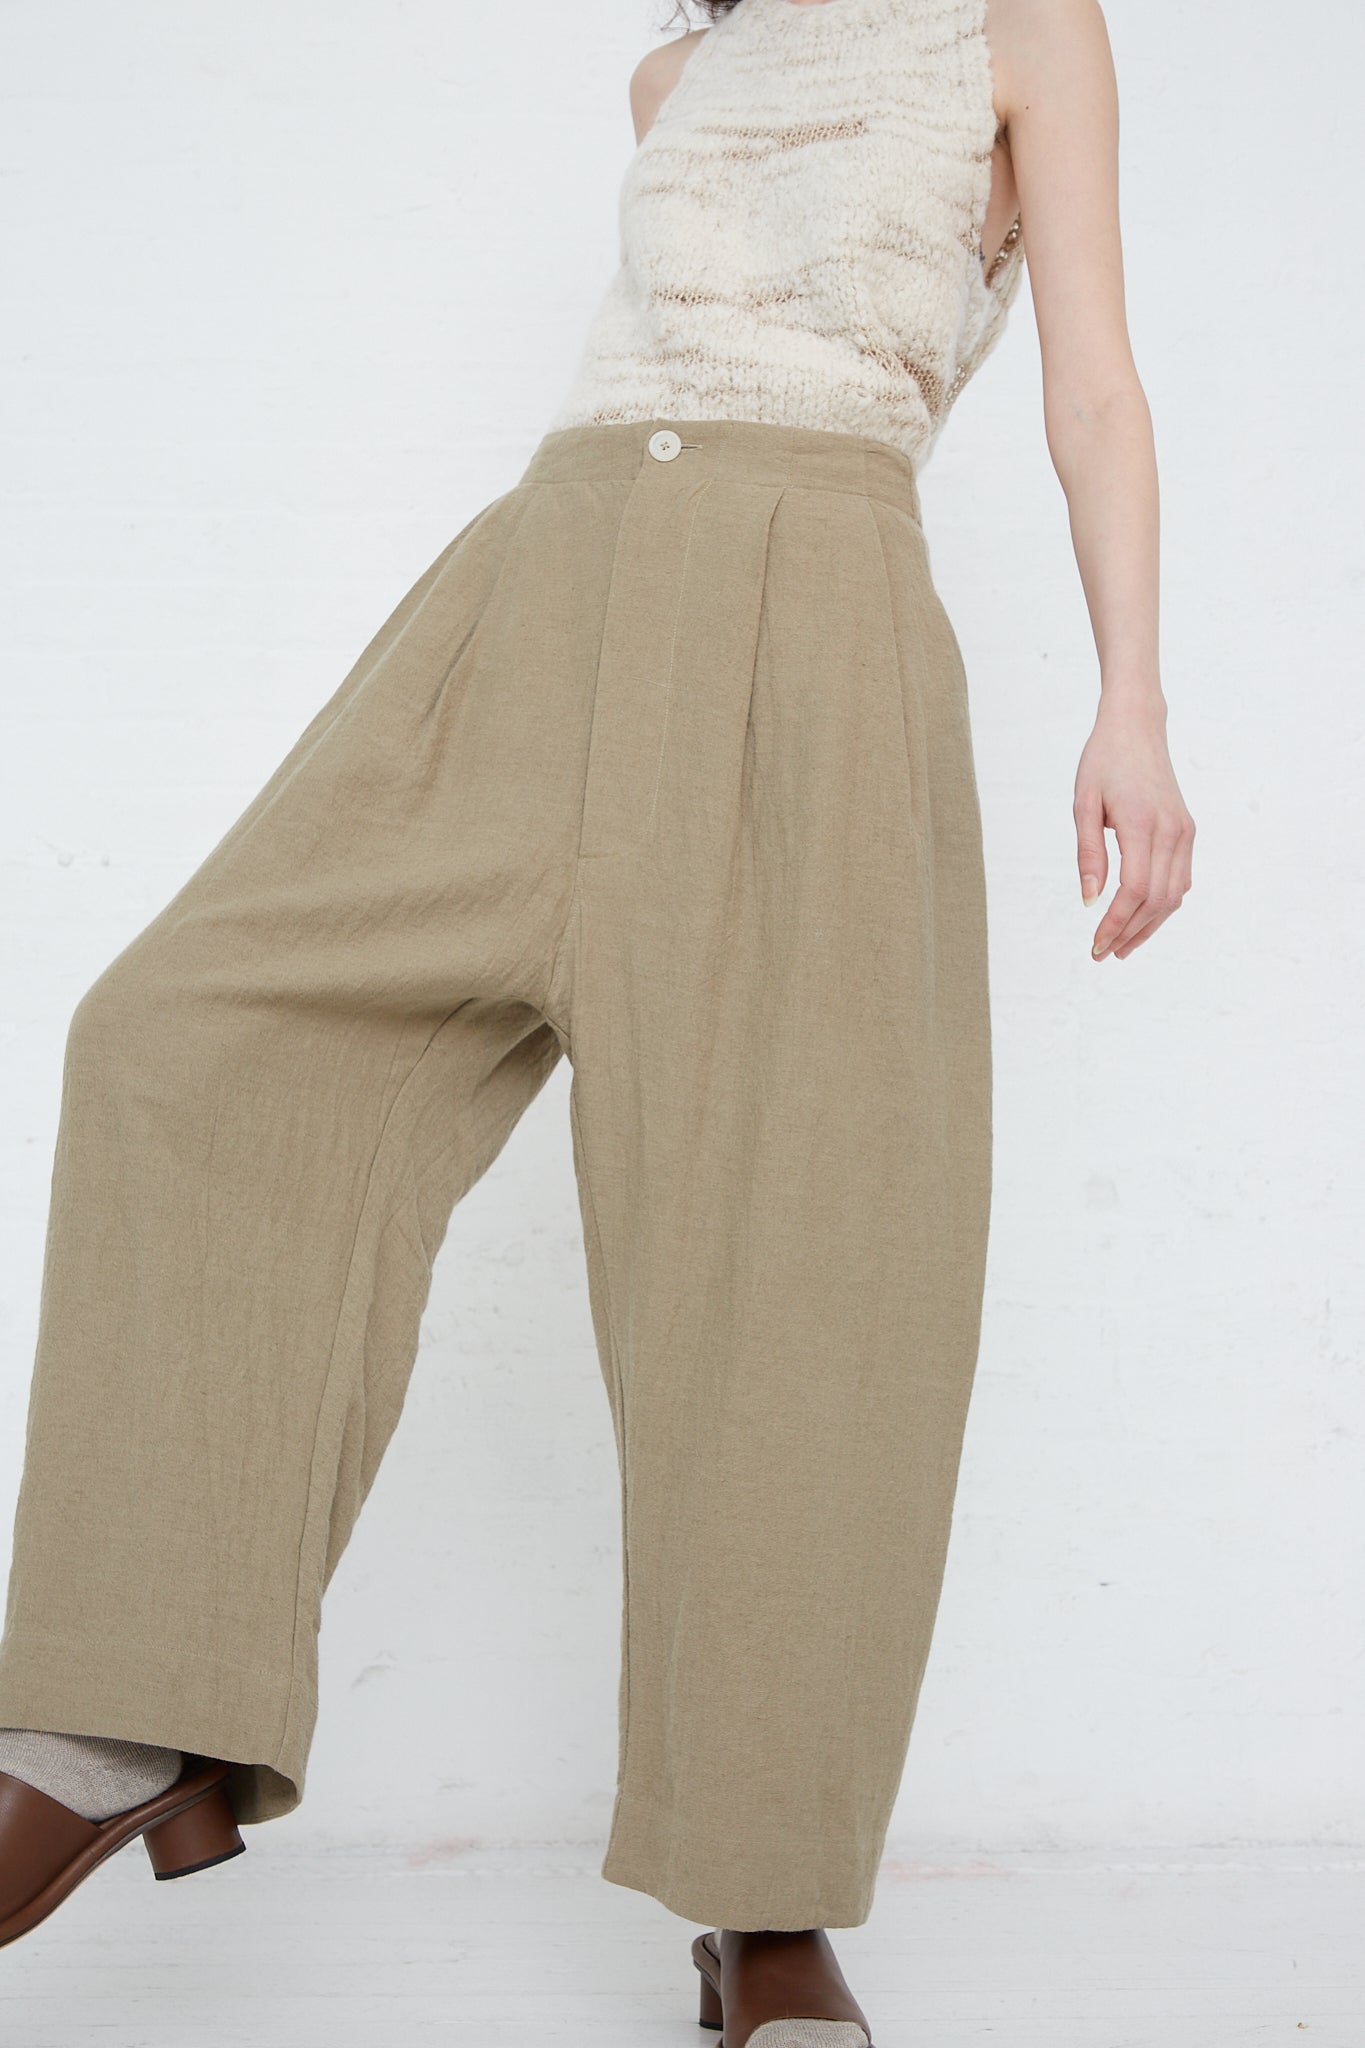 A woman is standing in a white room wearing Lauren Manoogian's Linen and Wool Como Trouser in Clay.